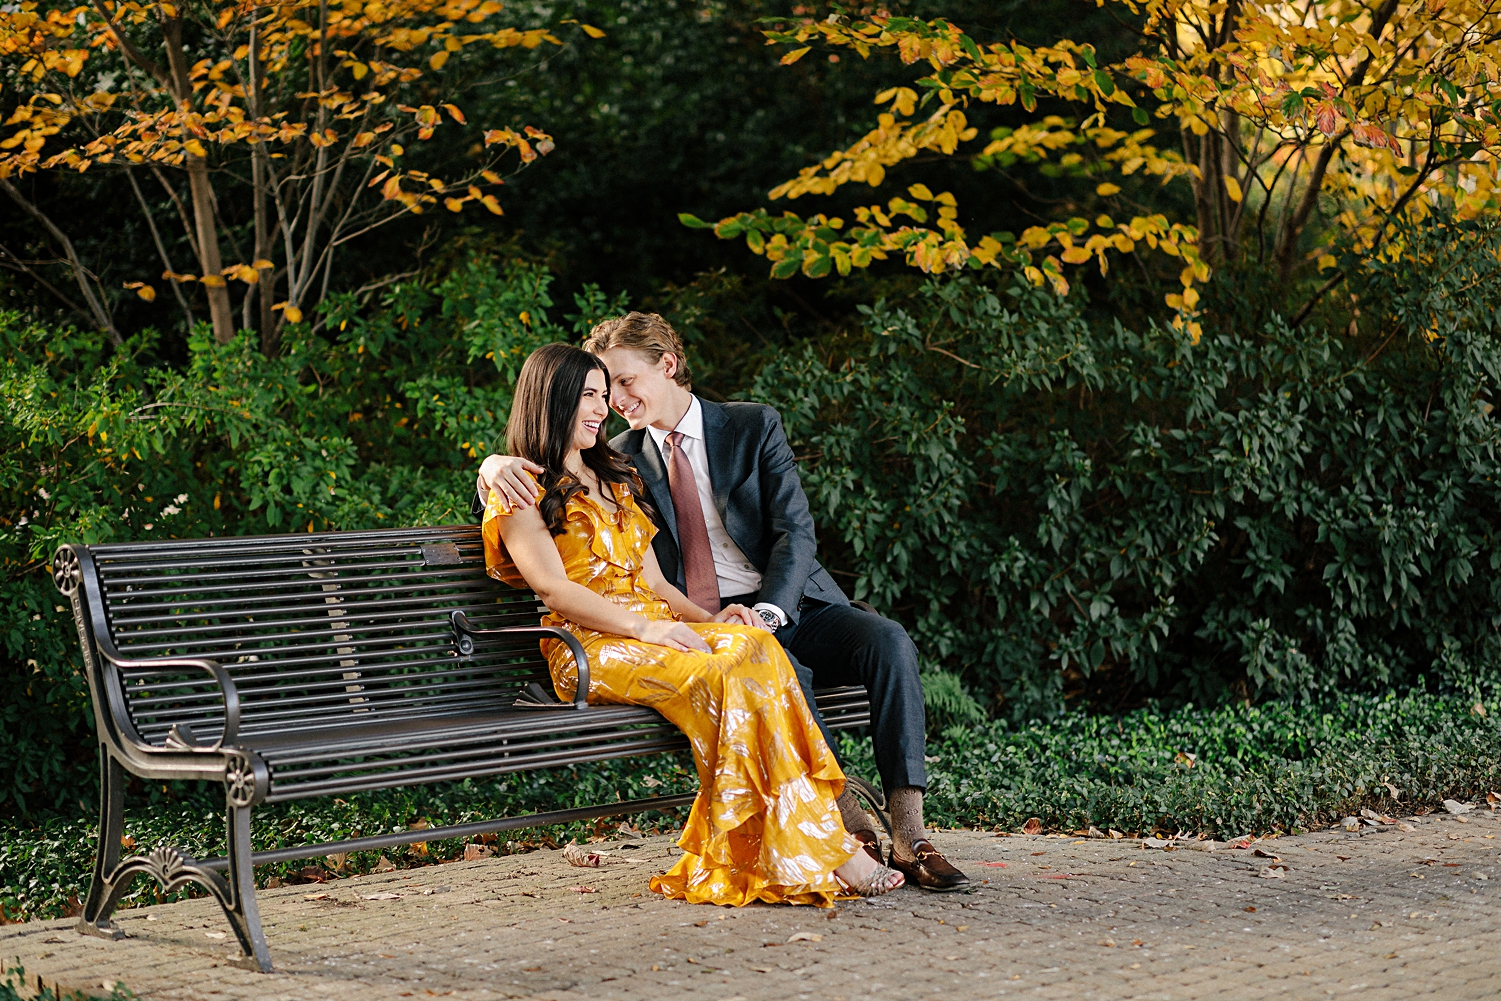 man laughing with woman in yellow dress while sitting on park bench